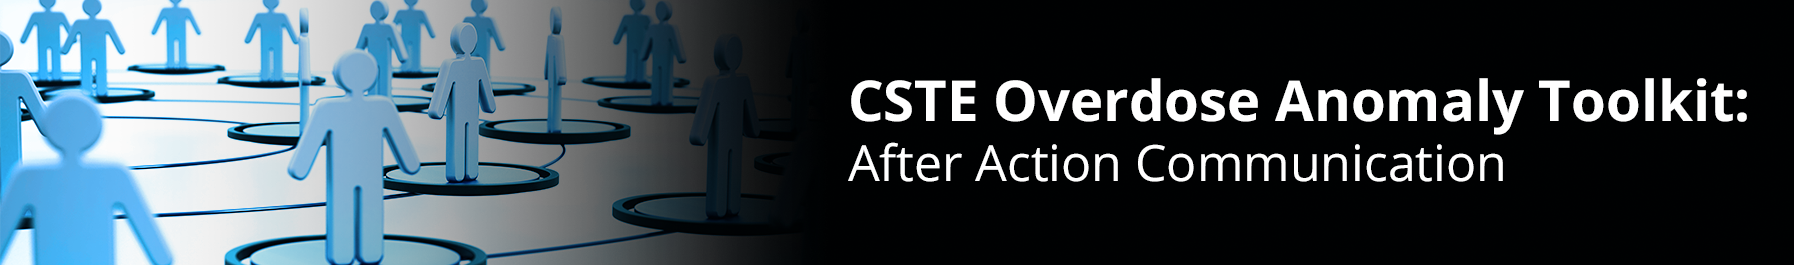 CSTE Overdose Anomaly Toolkit: After Action Communication